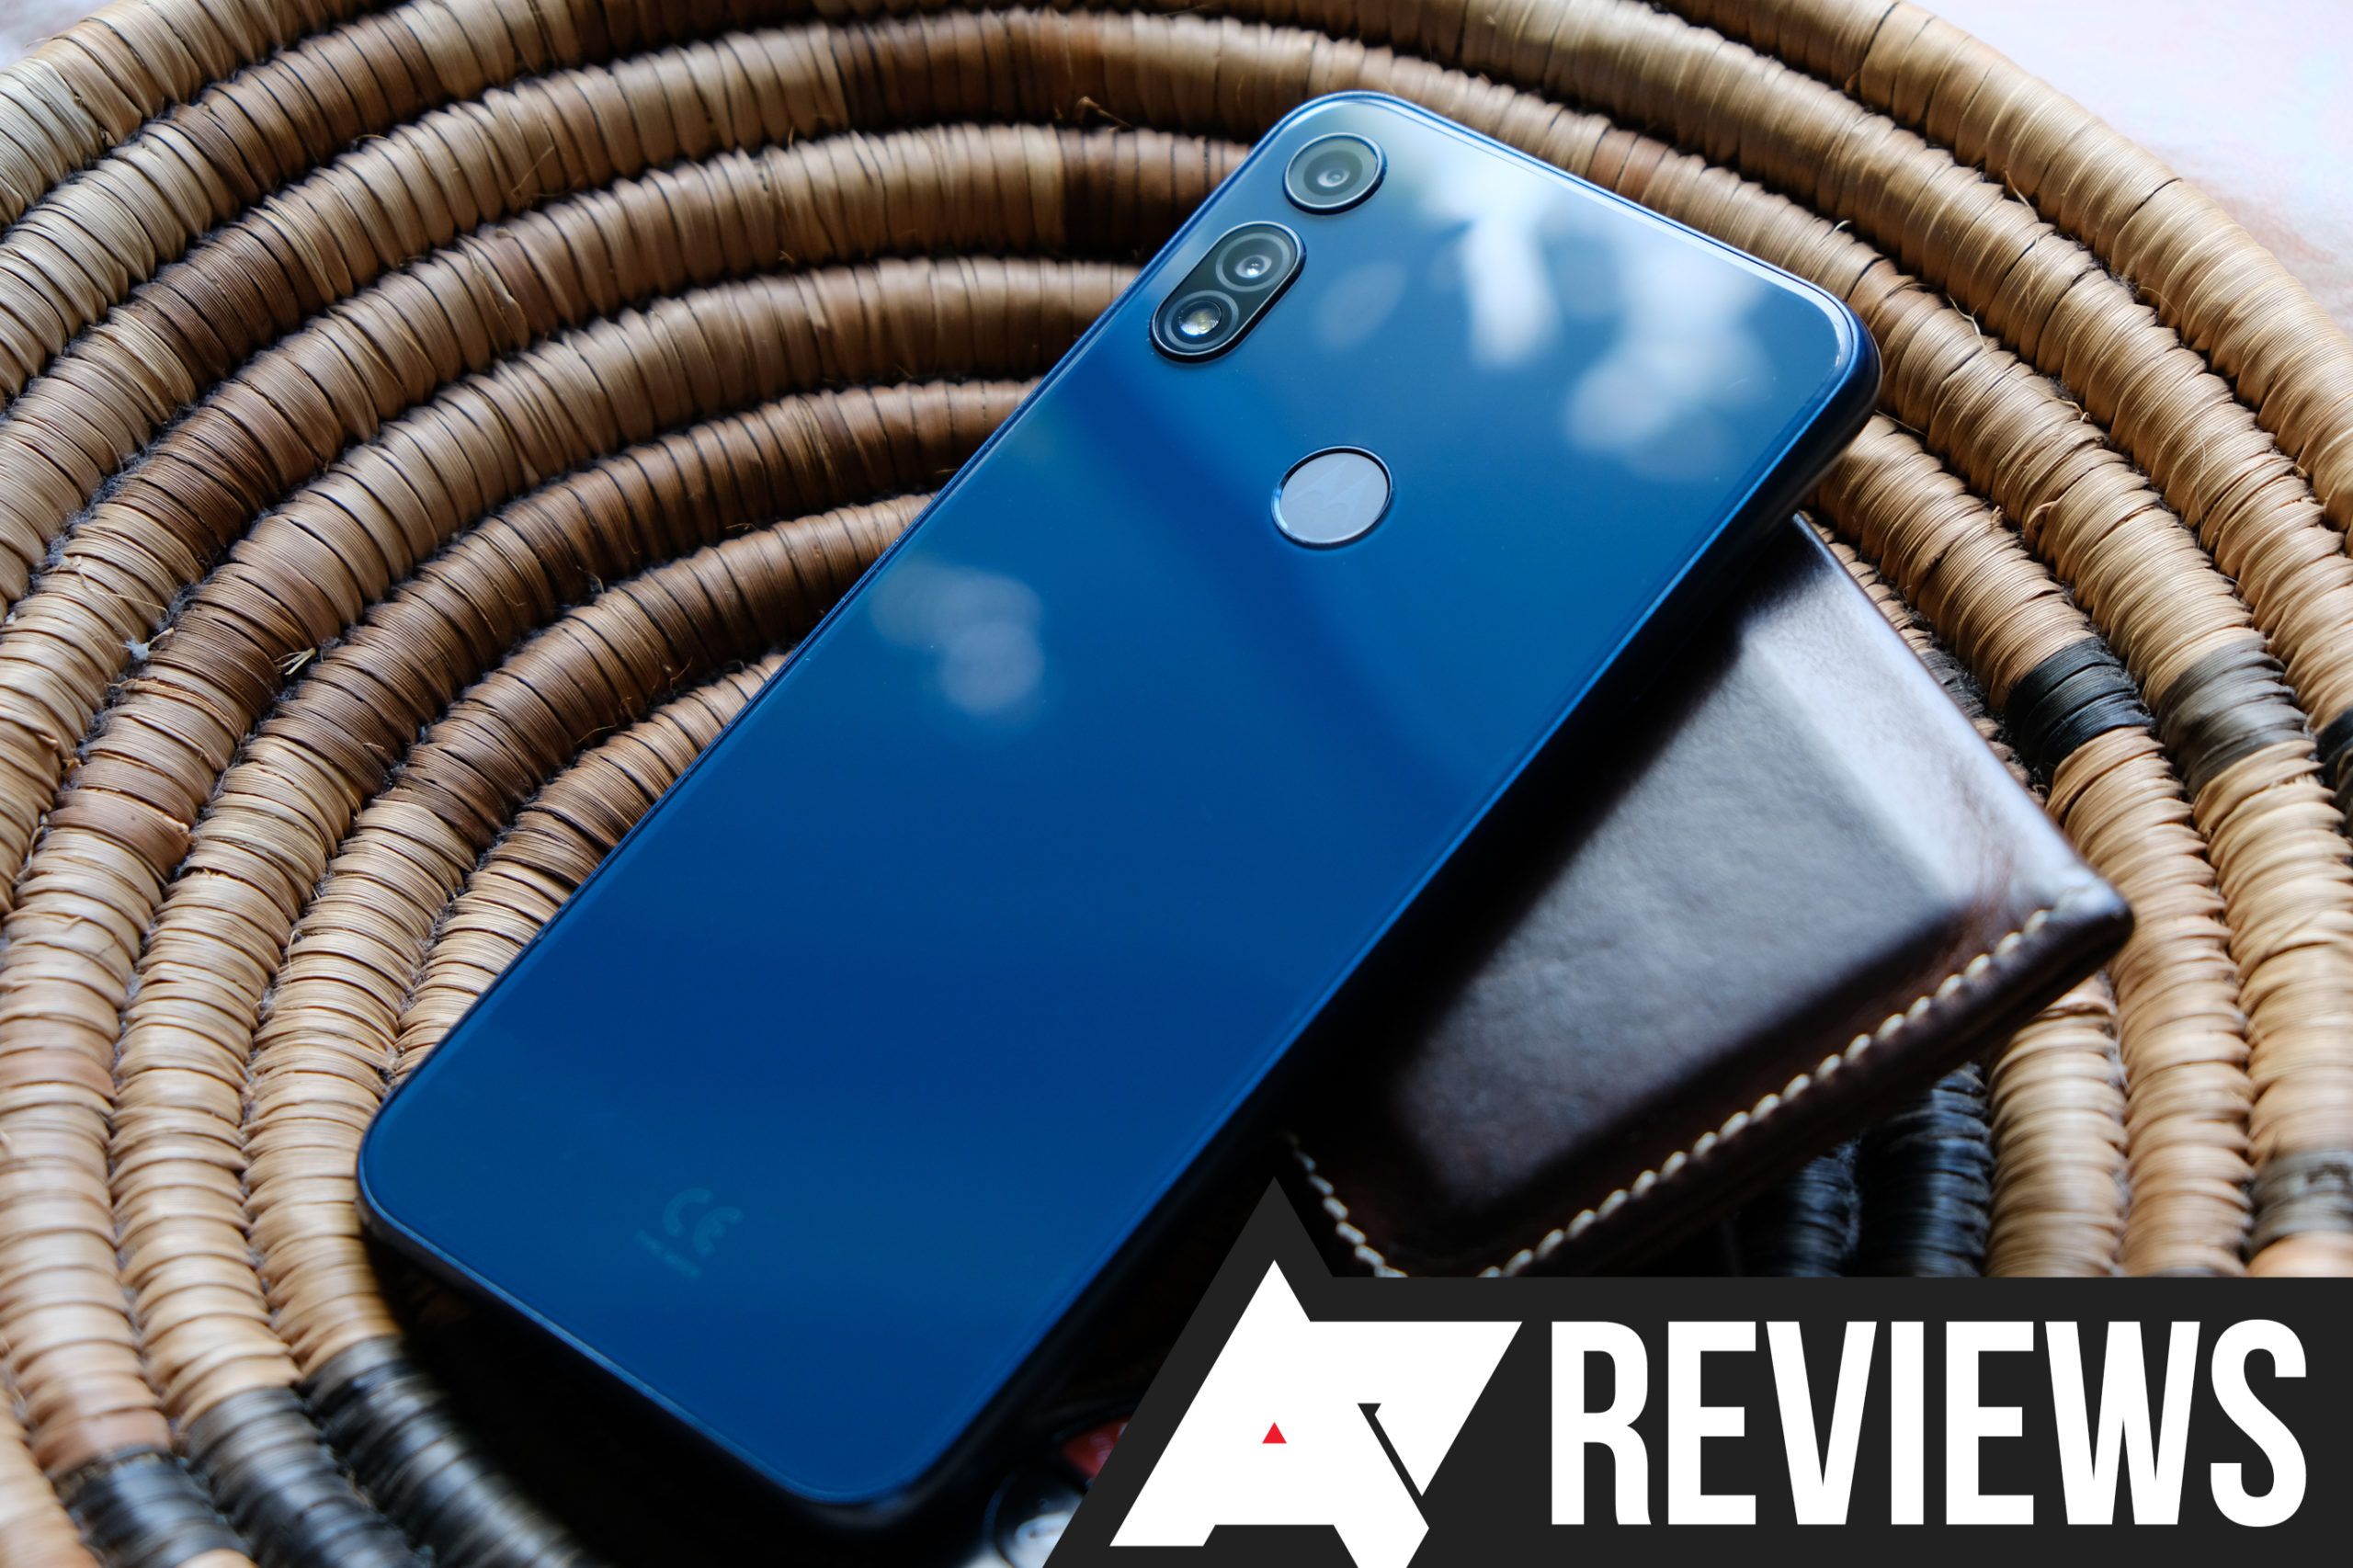 Motorola Moto E (2020) Review: As Good As It Gets For $150